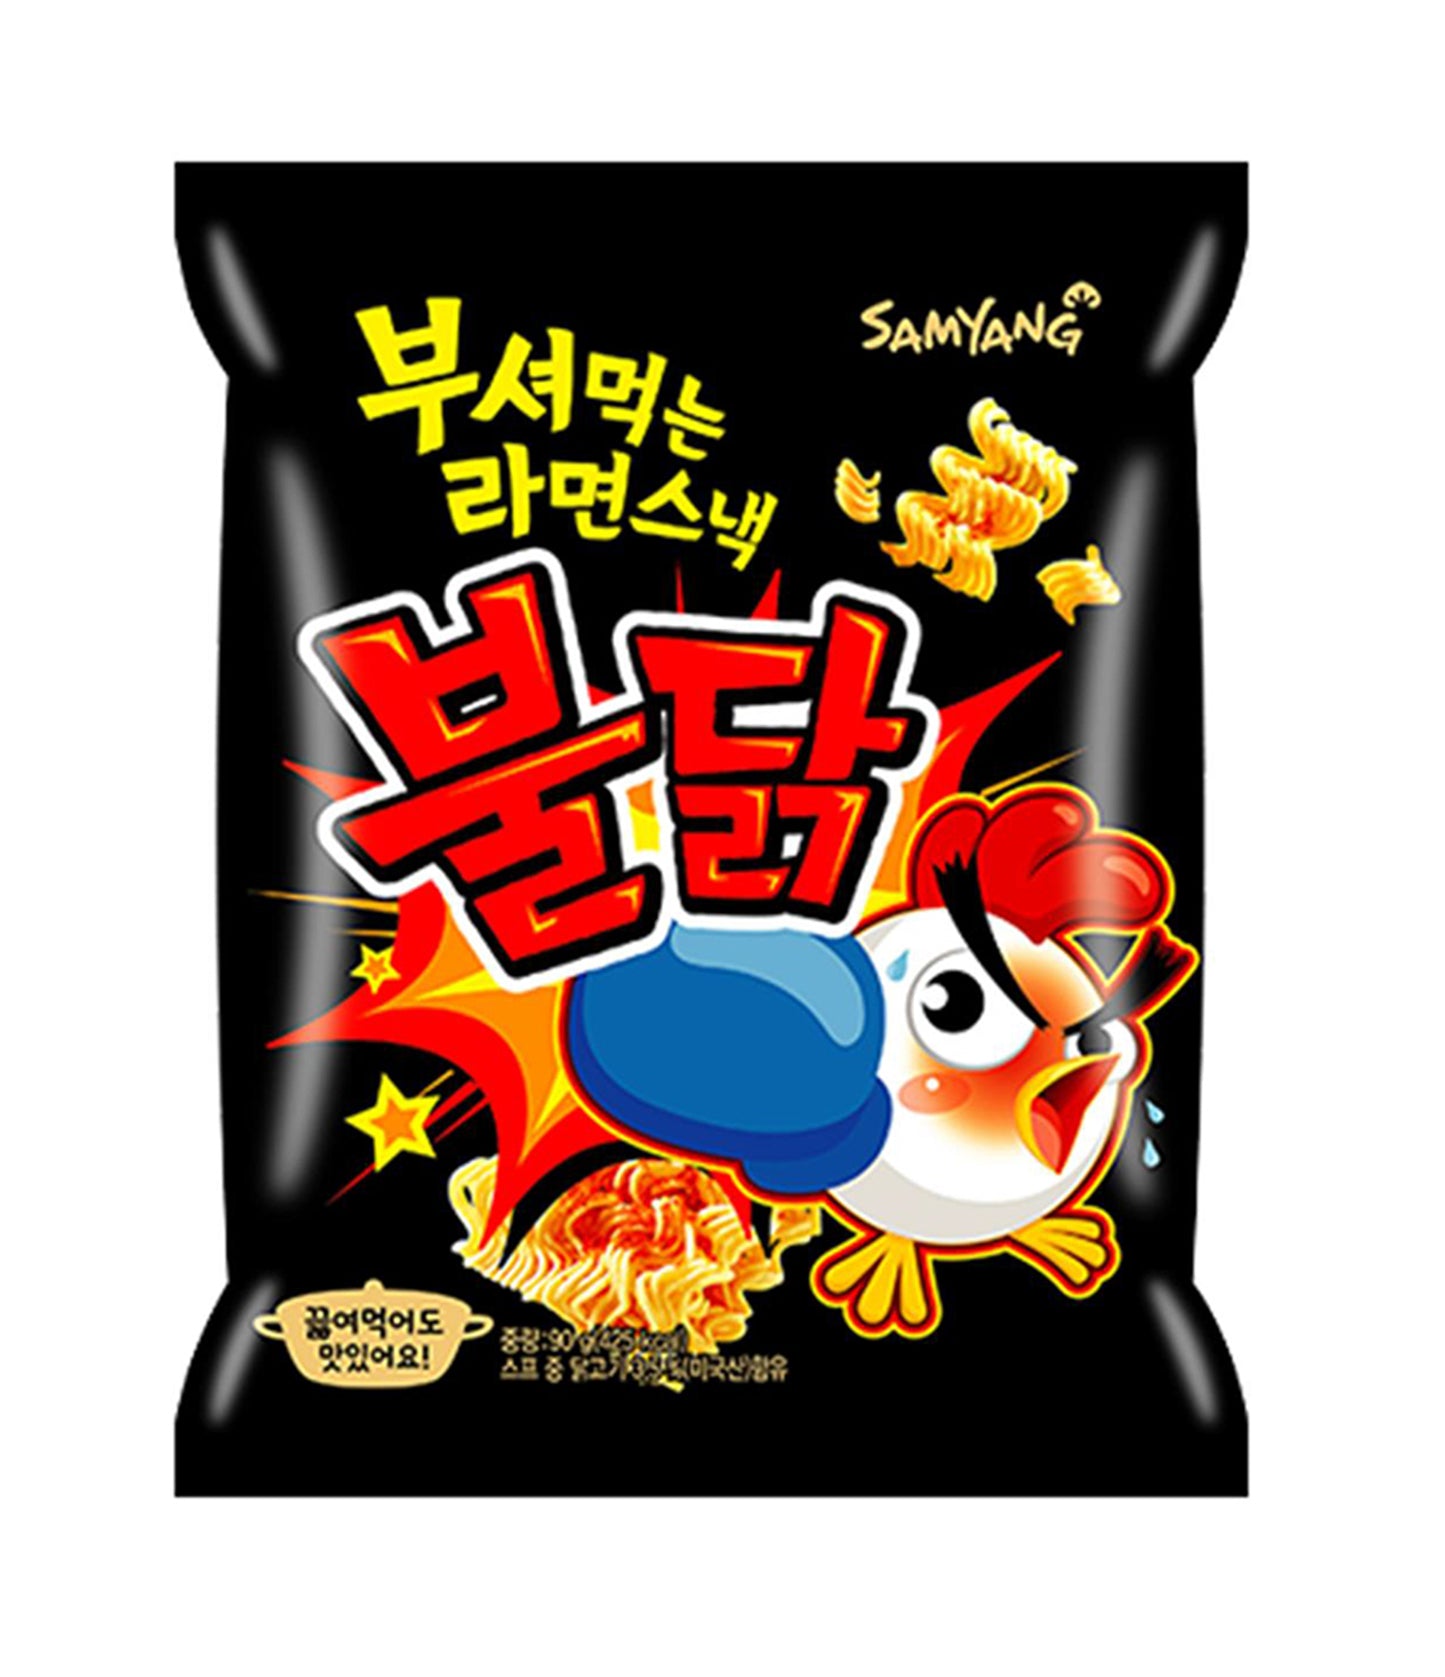 Spice Up Your Snack Game with Samyang Hot Chicken Ramen Snack - Delicious and Addictive Flavor Guaranteed!